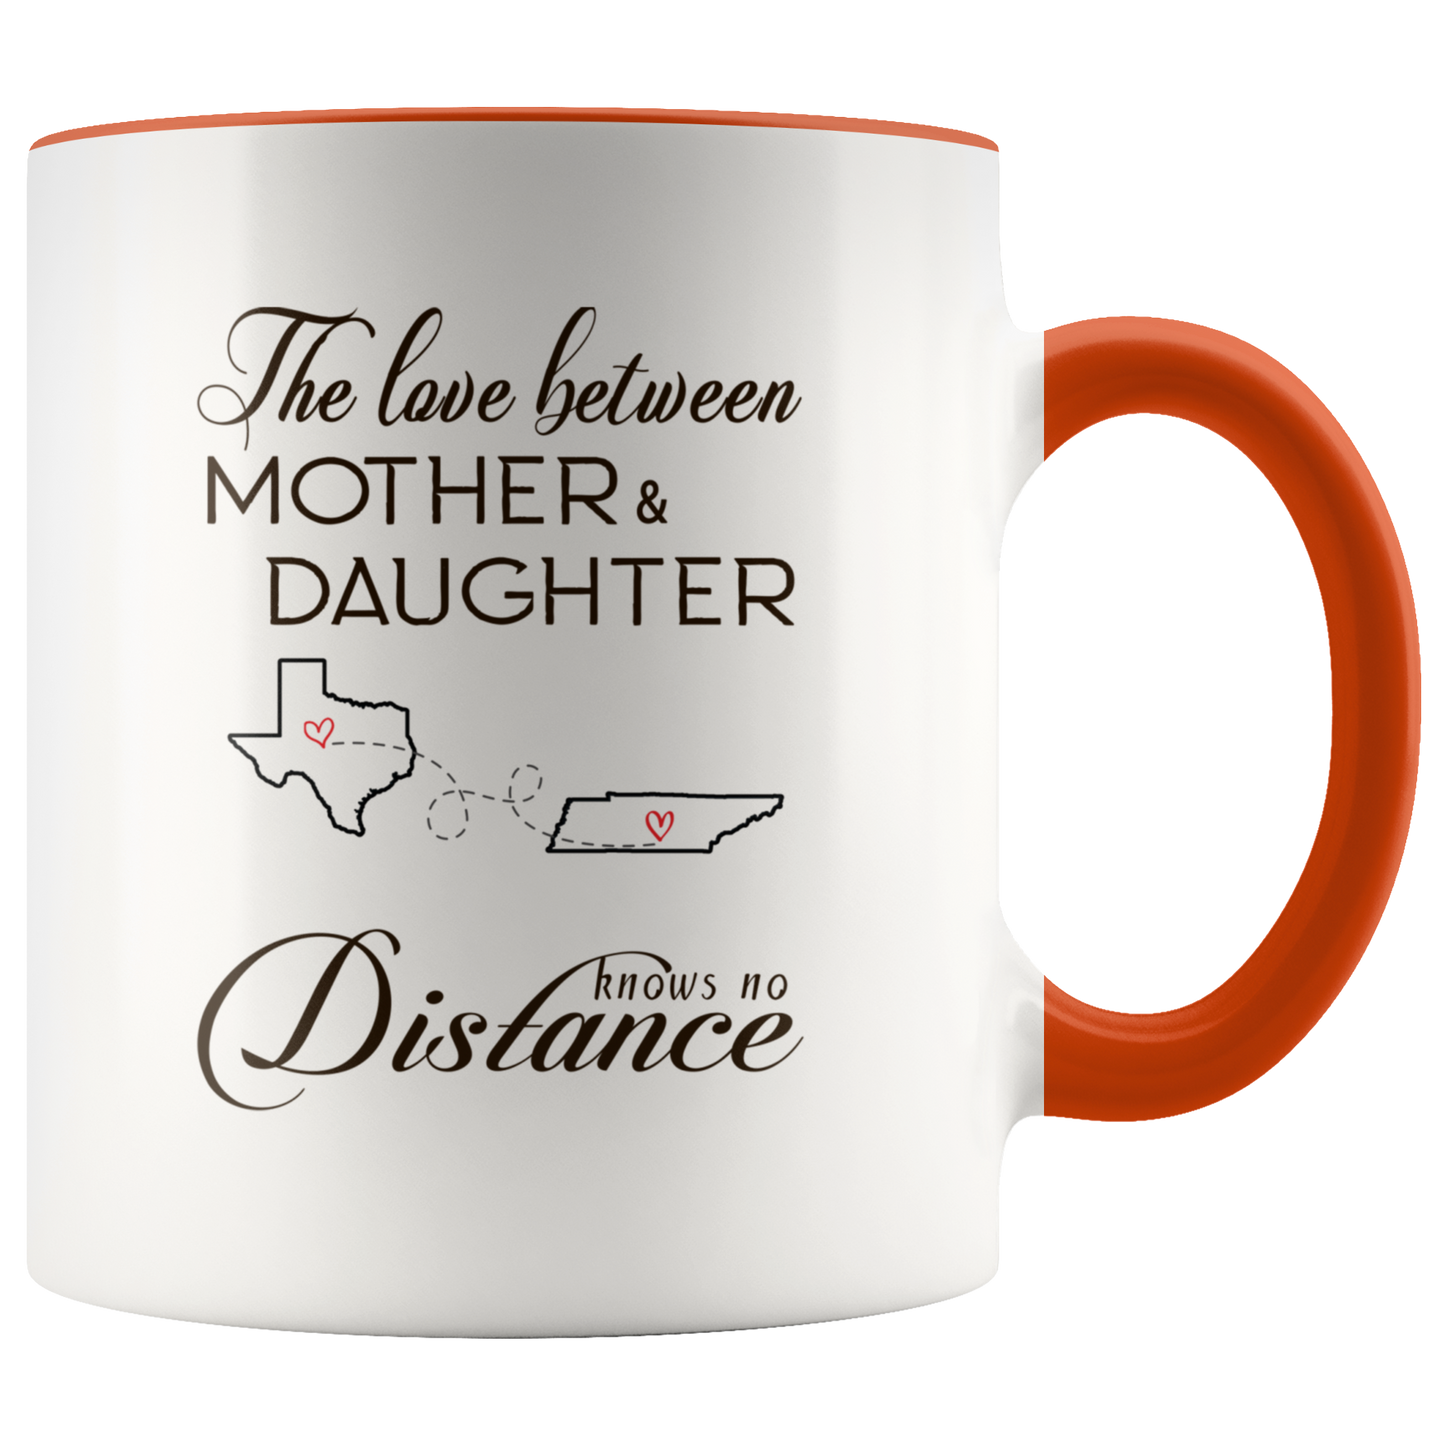 ND-21334245-sp-23759 - [ Texas | Tennessee ]Long Distance Accent Mug 11 oz Red - The Love Between Mother